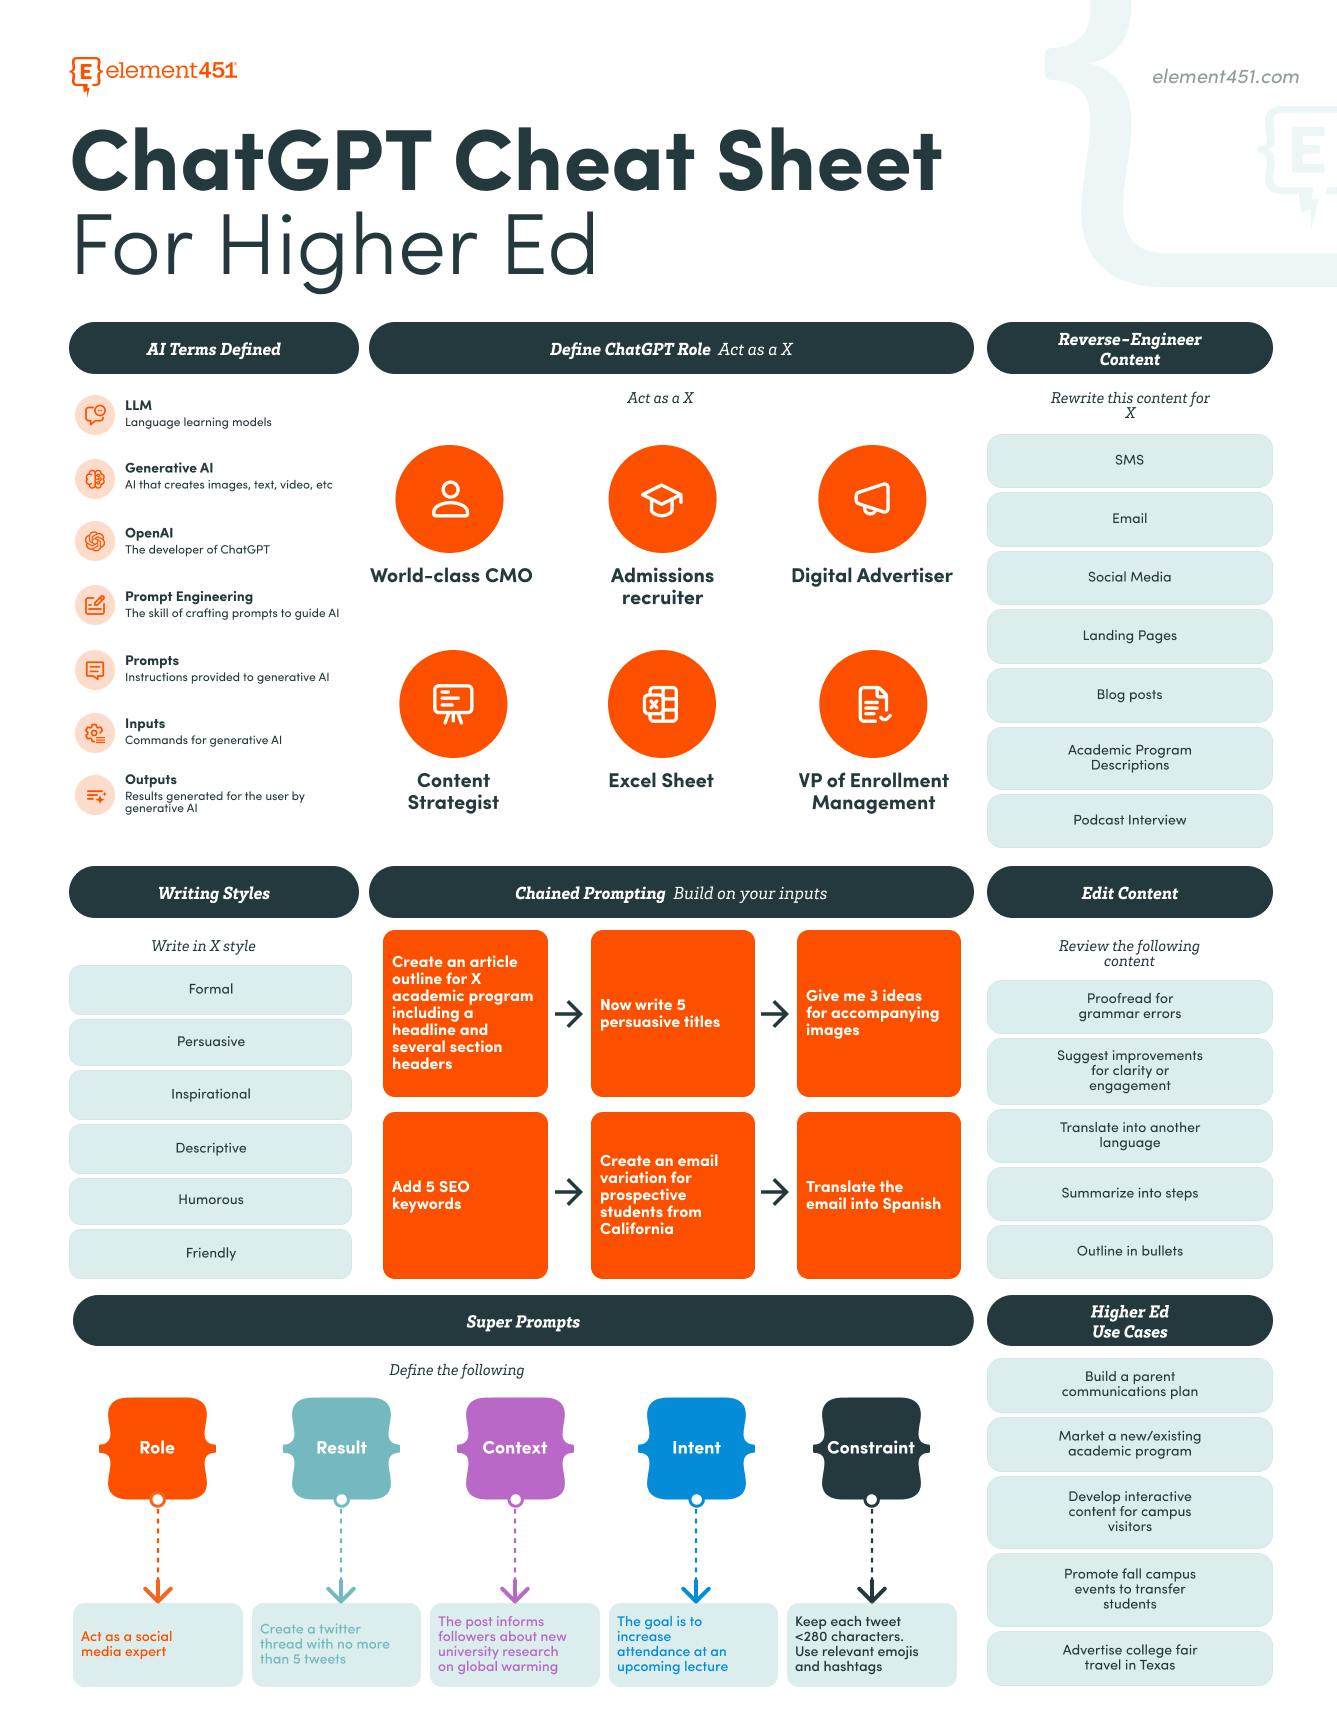 ChatGPT Cheat Sheet for Higher Ed: Your Guide to AI-Powered Marketing ...